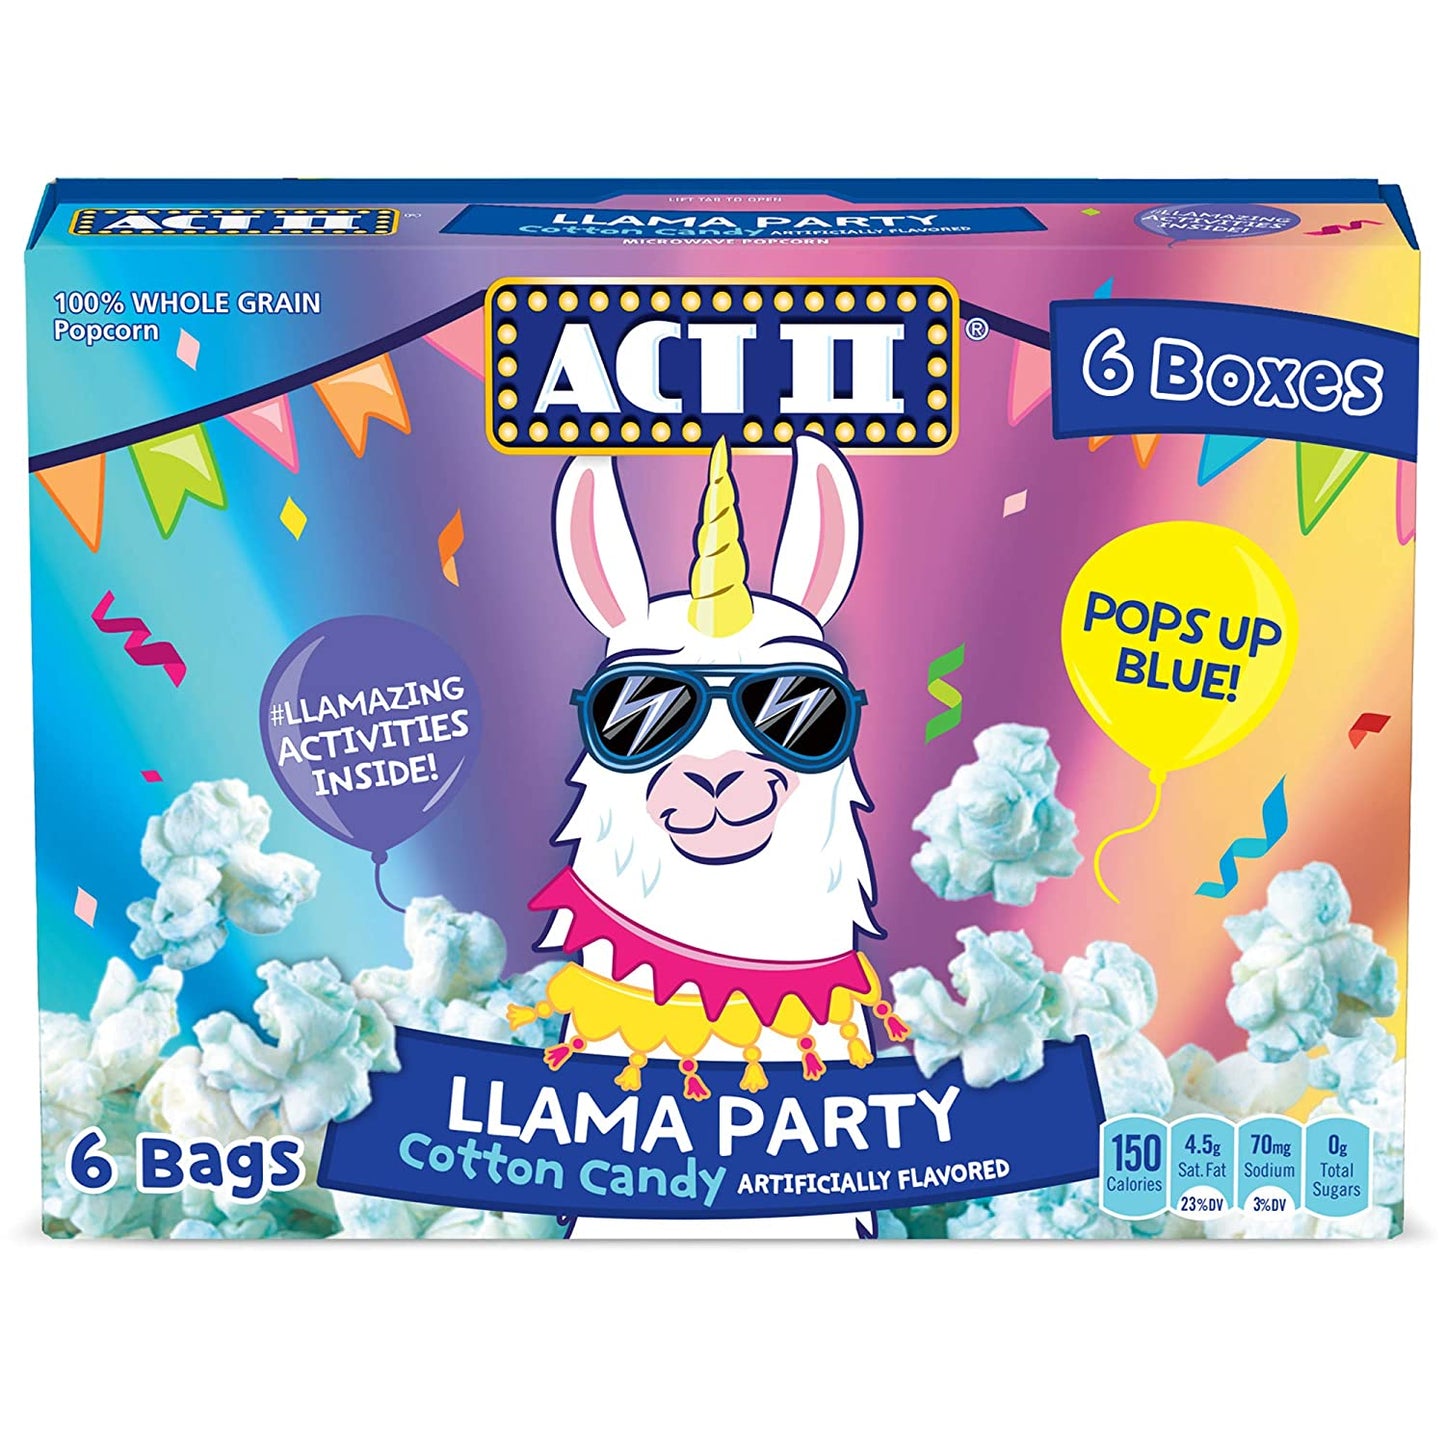 Act II Llama Party Cotton Candy Flavored Microwave Popcorn, 16.5 oz. 6-Count (Pack of 6)